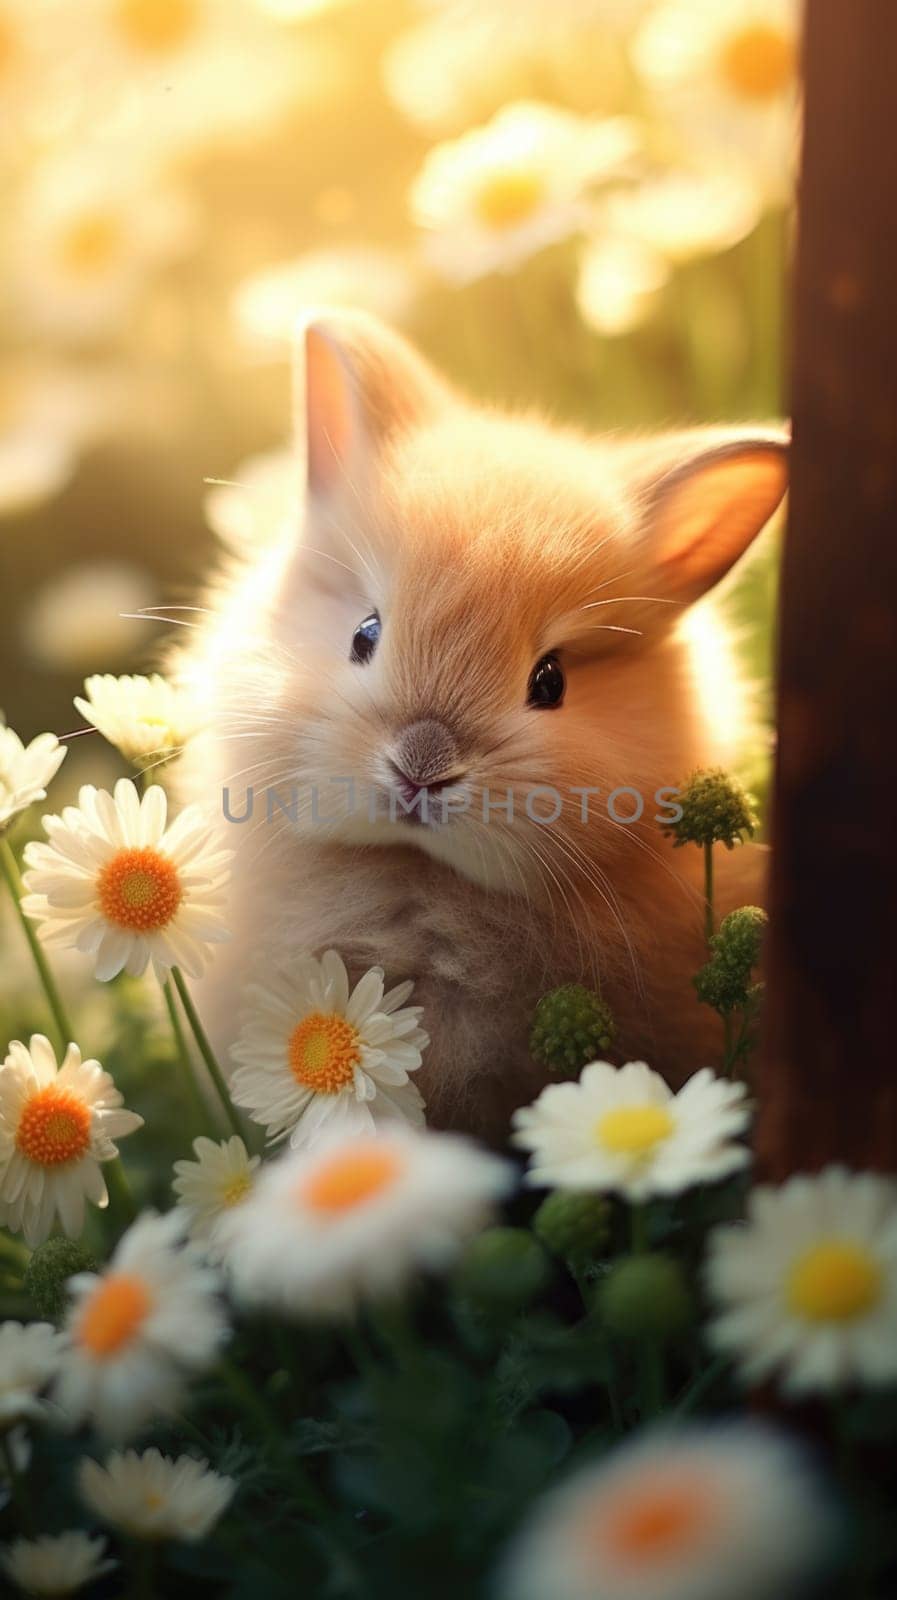 A small bunny sitting in a field of flowers, AI by starush